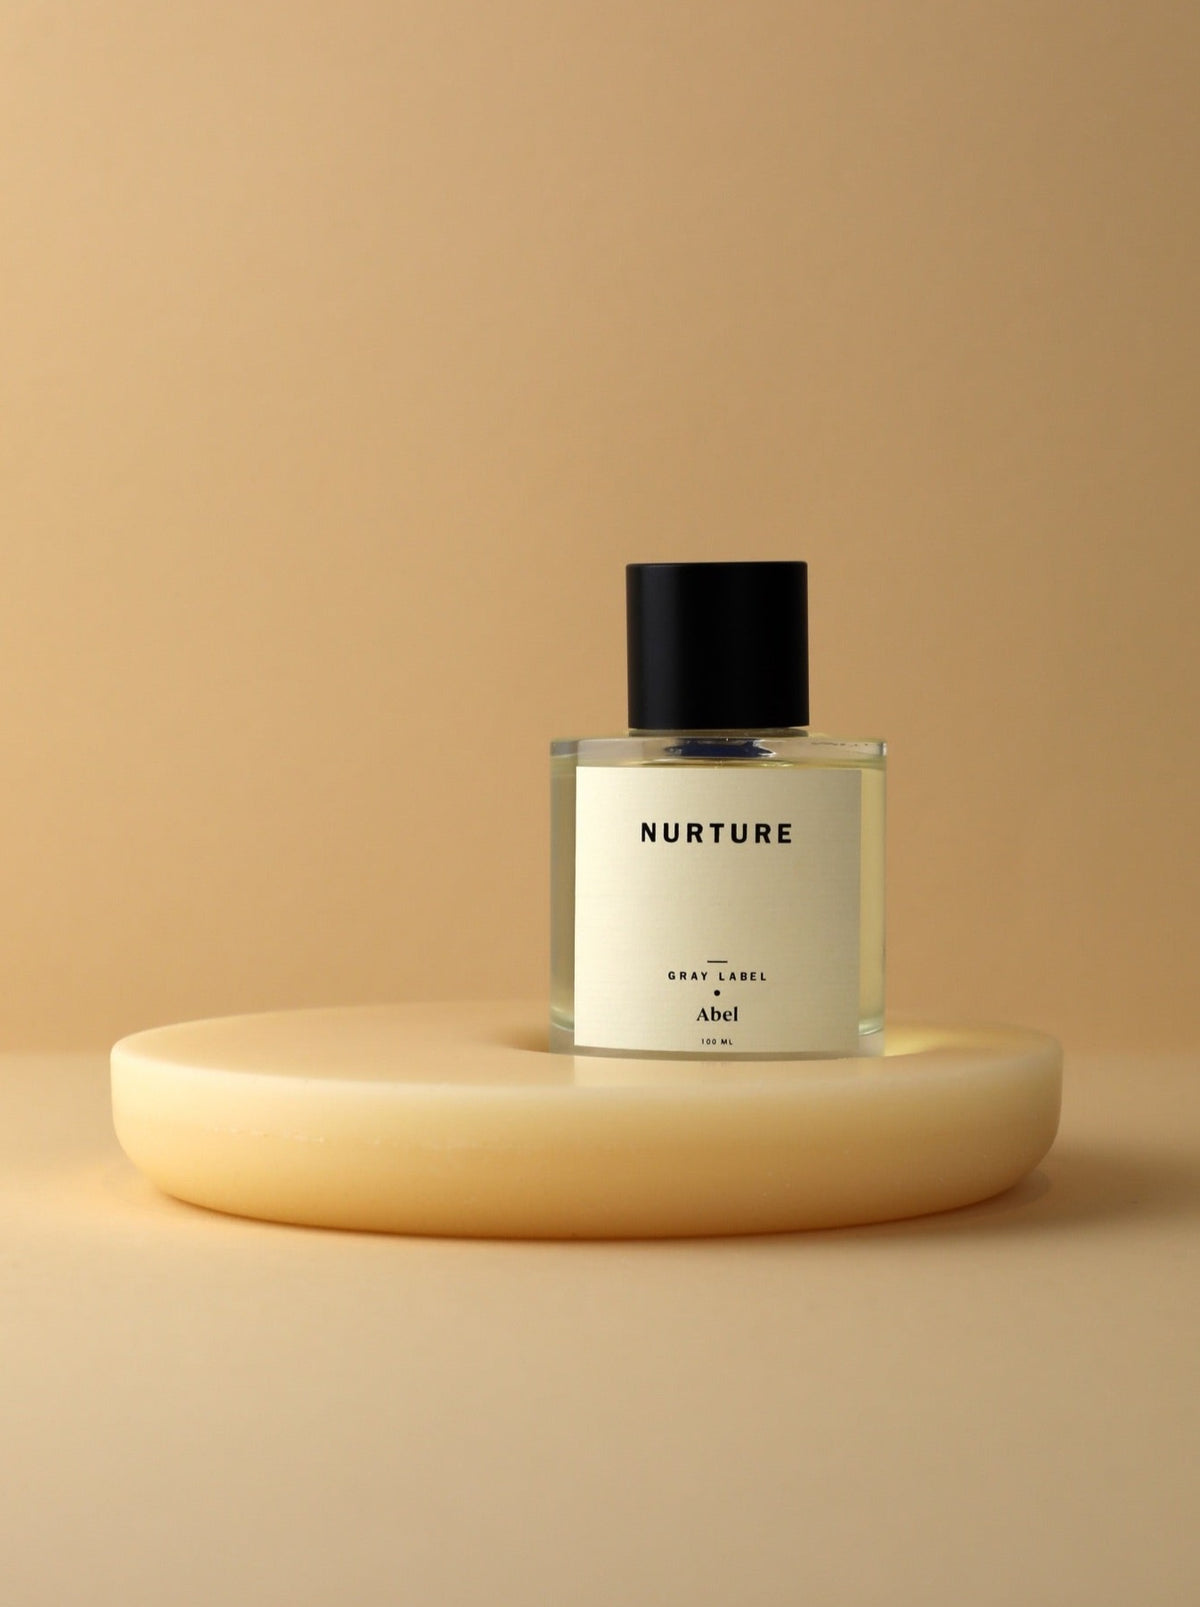 A bottle of NURTURE - grey label perfume sitting on top of a yellow plate, promoting fairtrade and sustainable farming practices. (Brand: Abel)